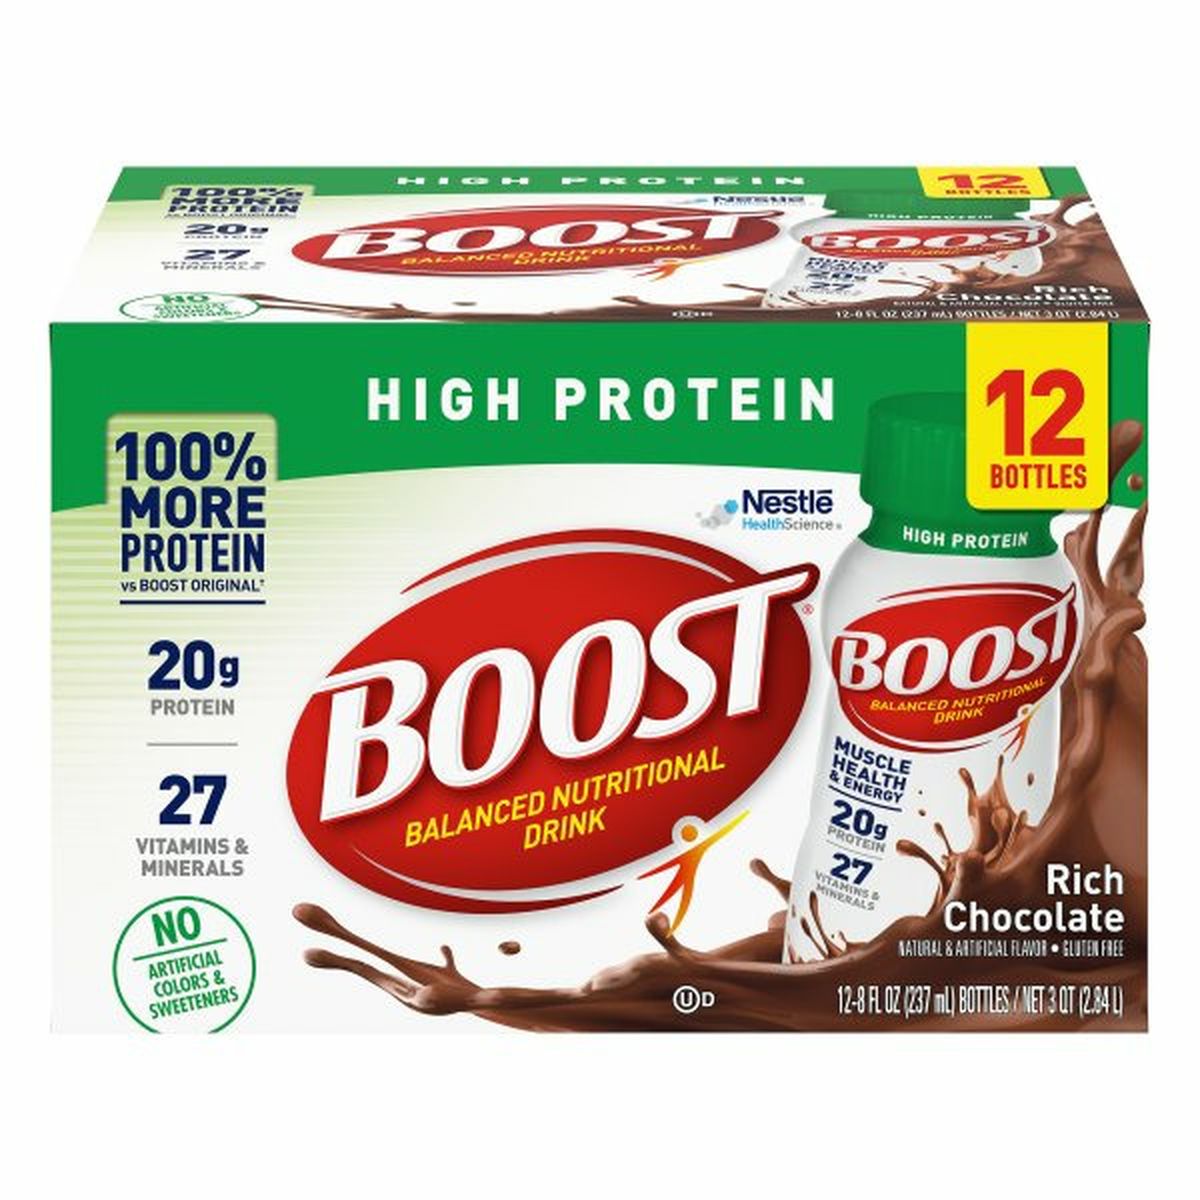 Calories in BOOST Health Science Nutritional Drink, Rich Chocolate, Balance, High Protein